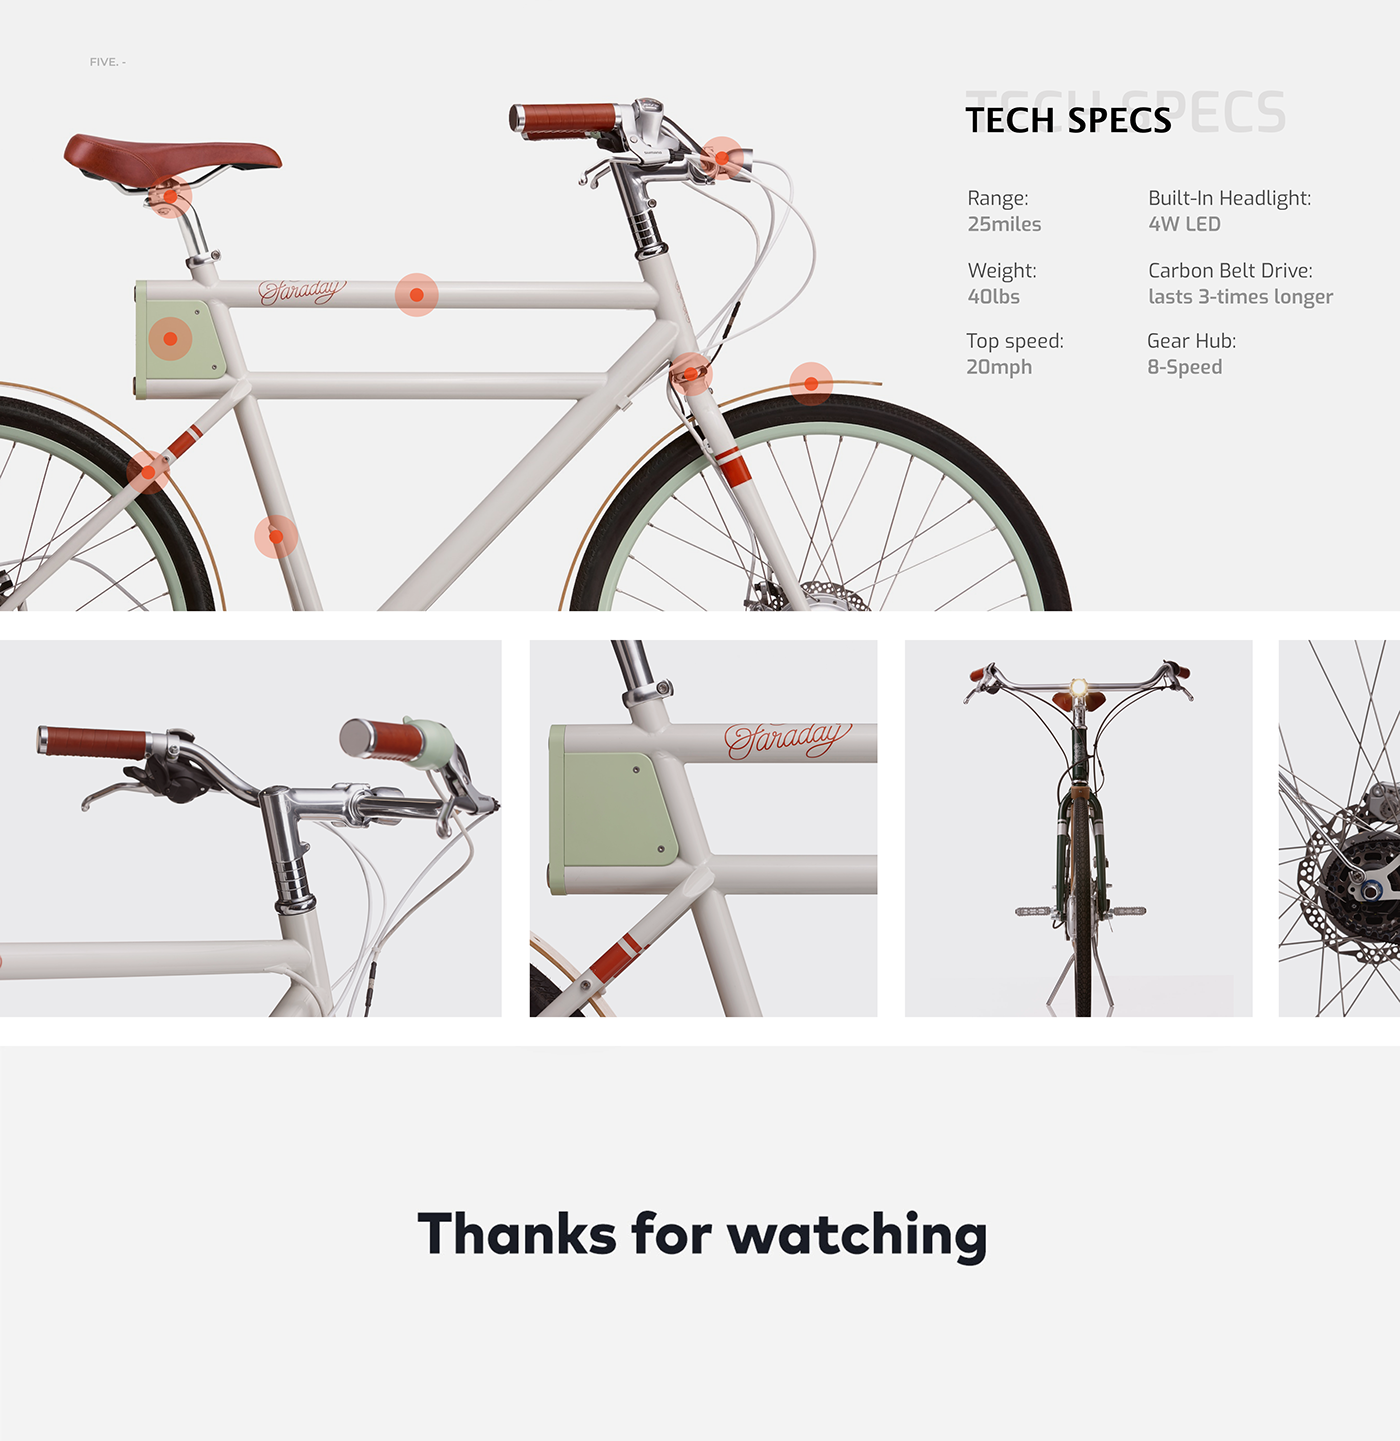 Bike faraday Interface UI interaction motion graphic Adobe XD user experience after effects Web Design 